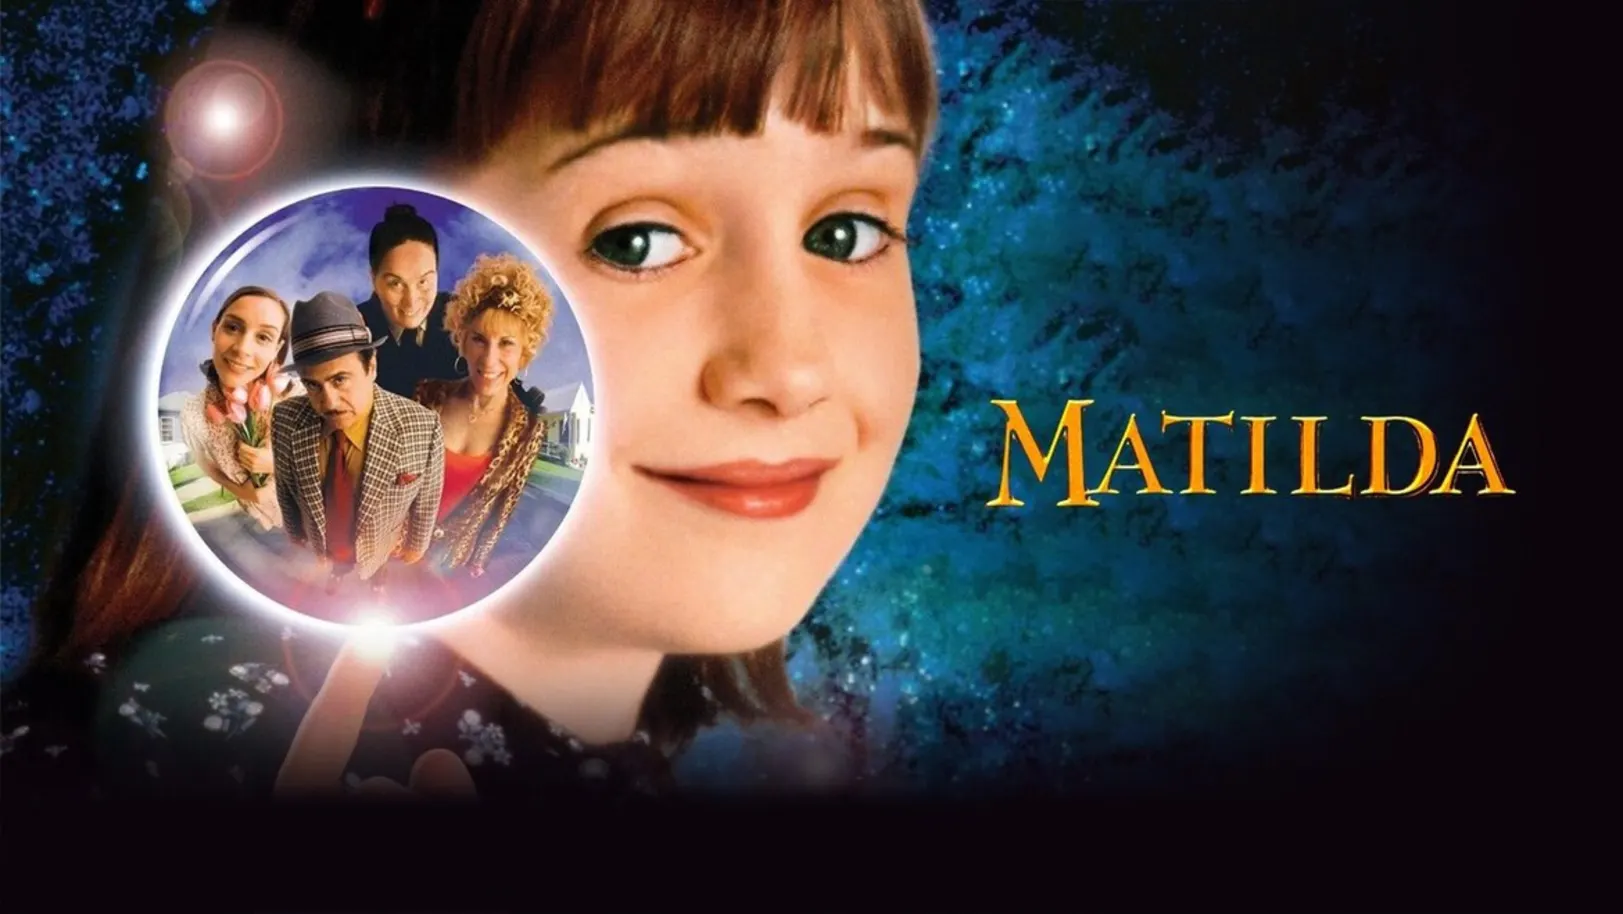 Matilda Streaming Now On &Prive HD